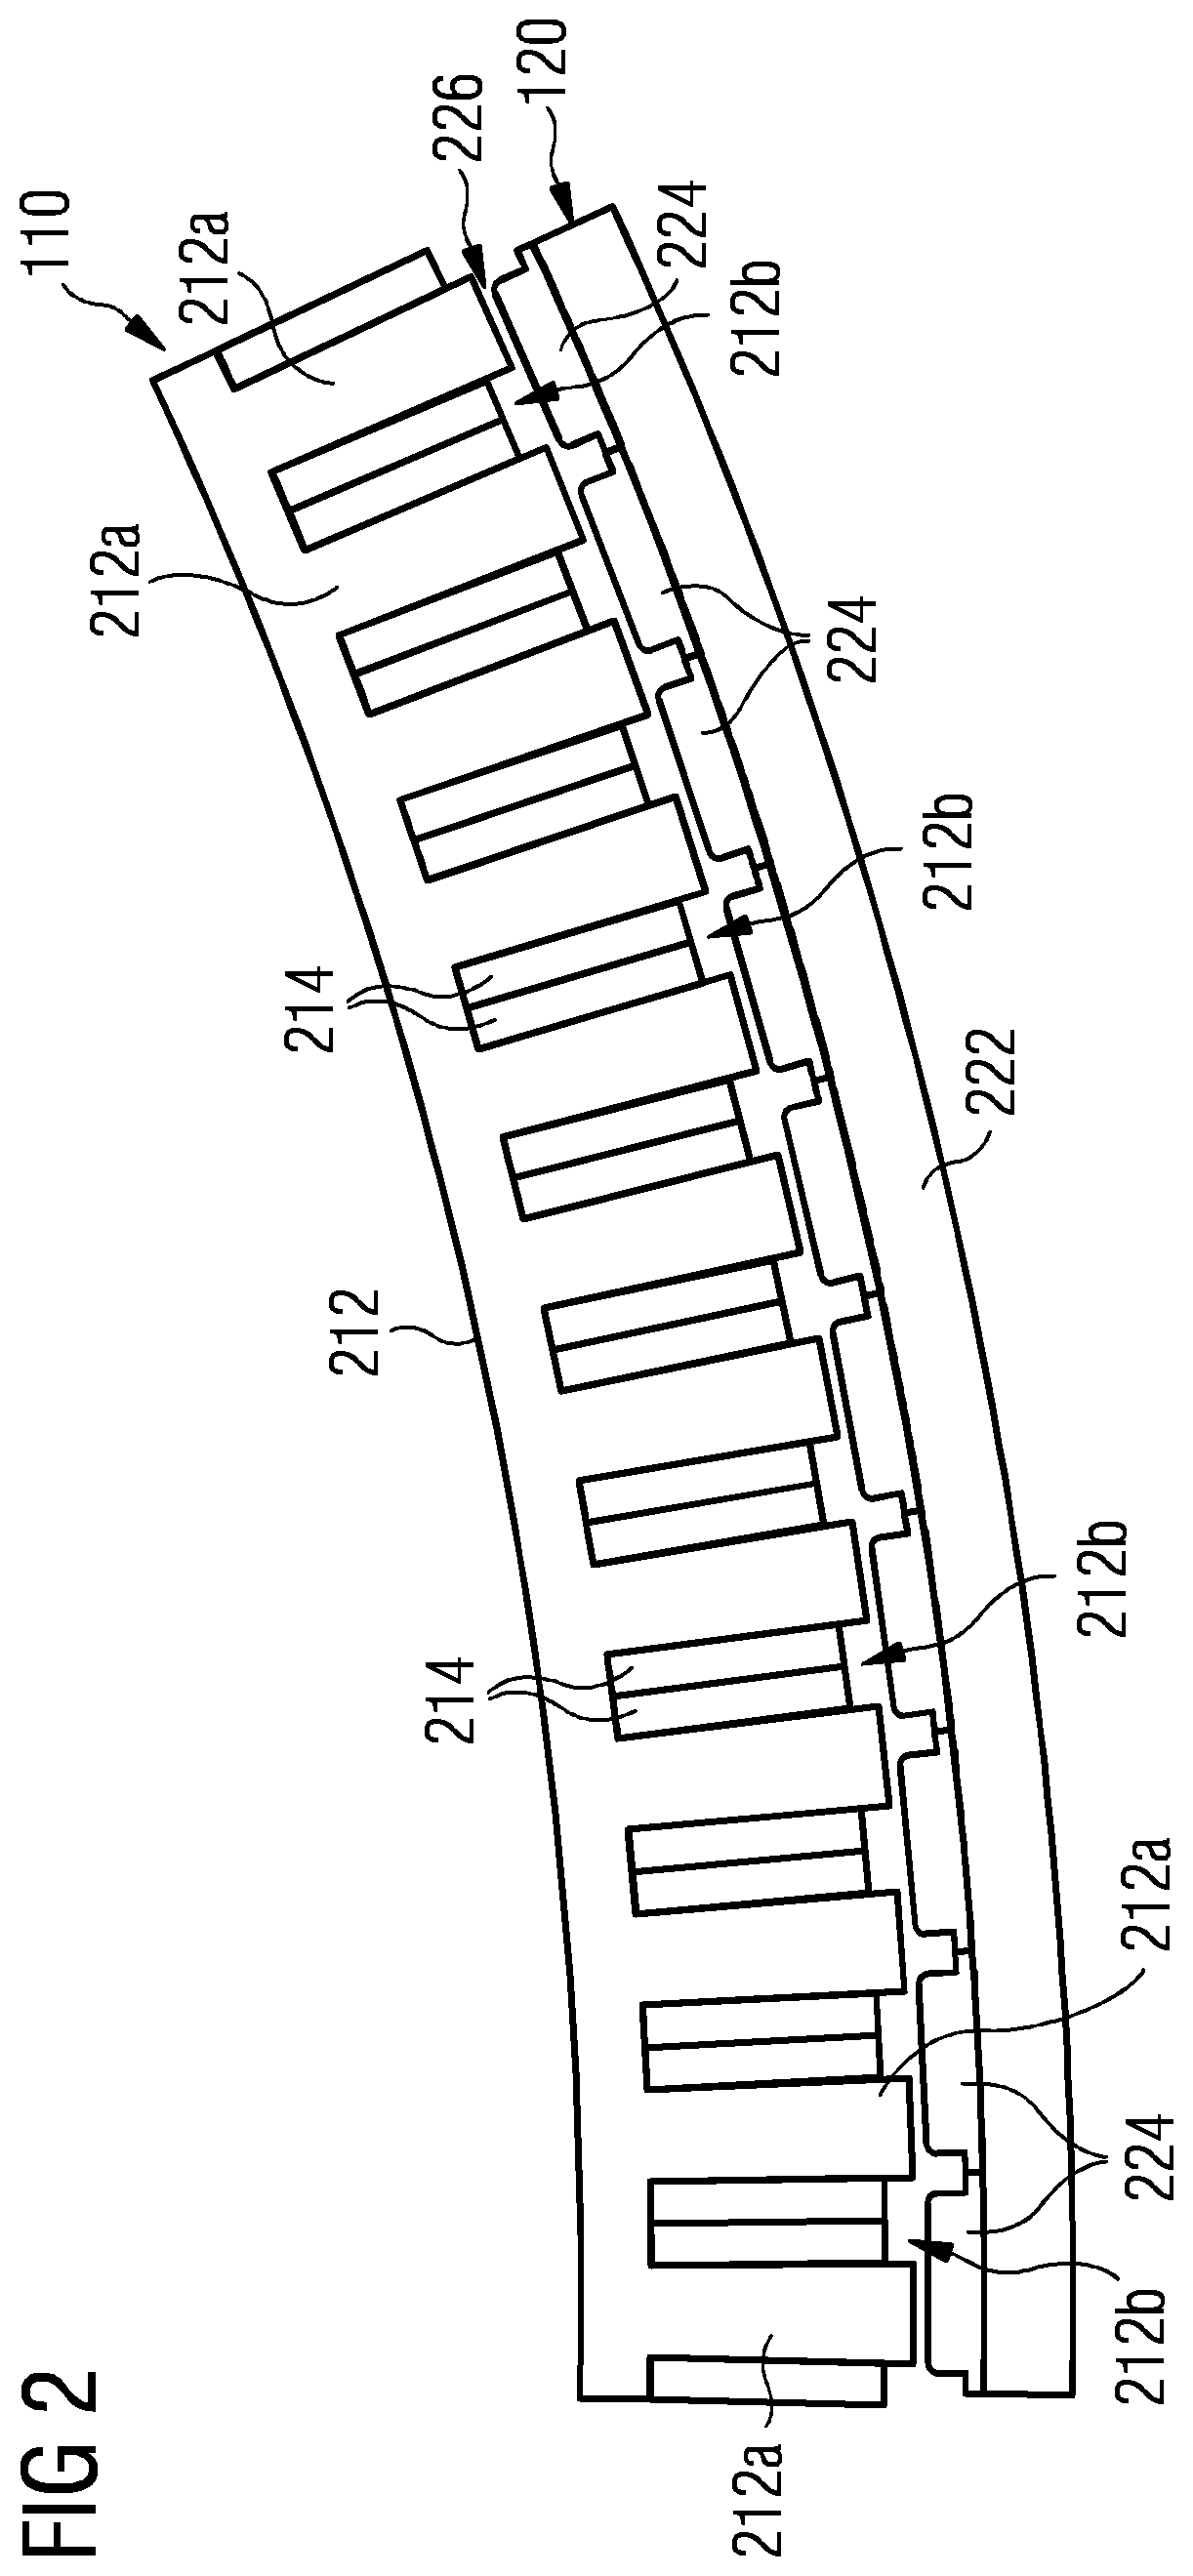 Stator assembly comprising electrical insulation devices having an outer surface with elevated surface portions